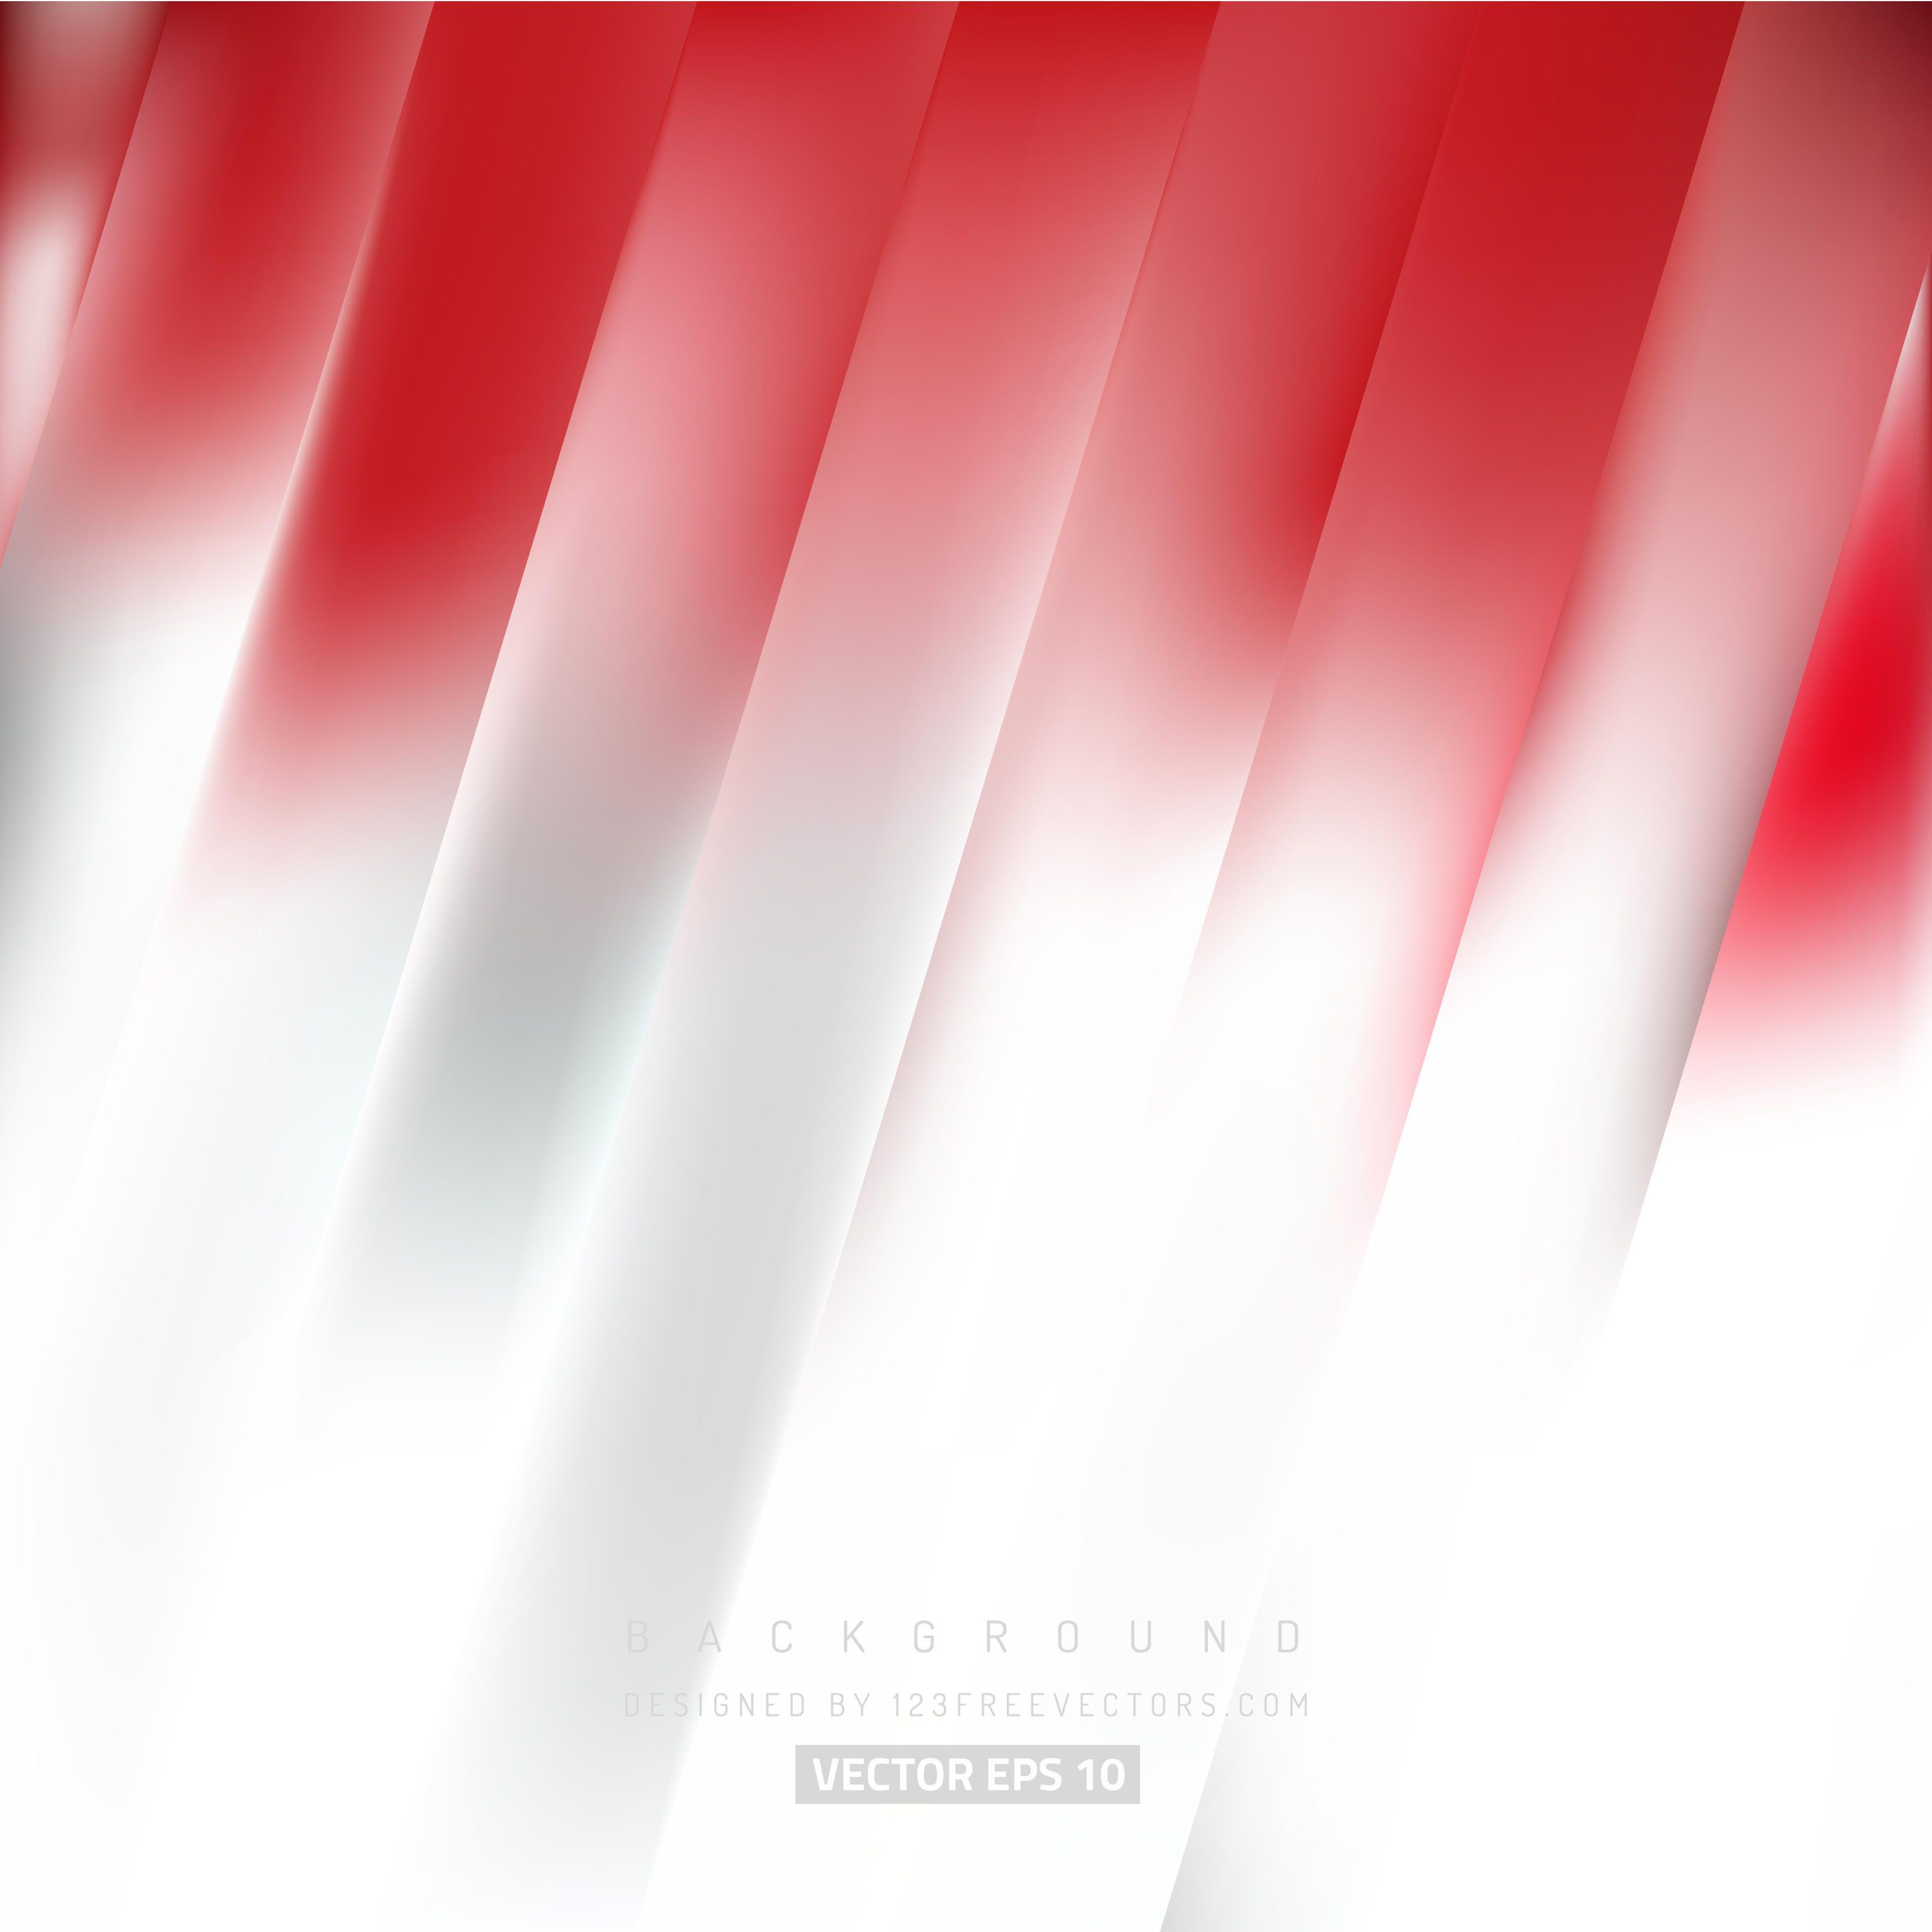 Red White Striped BackgroundFreevectors